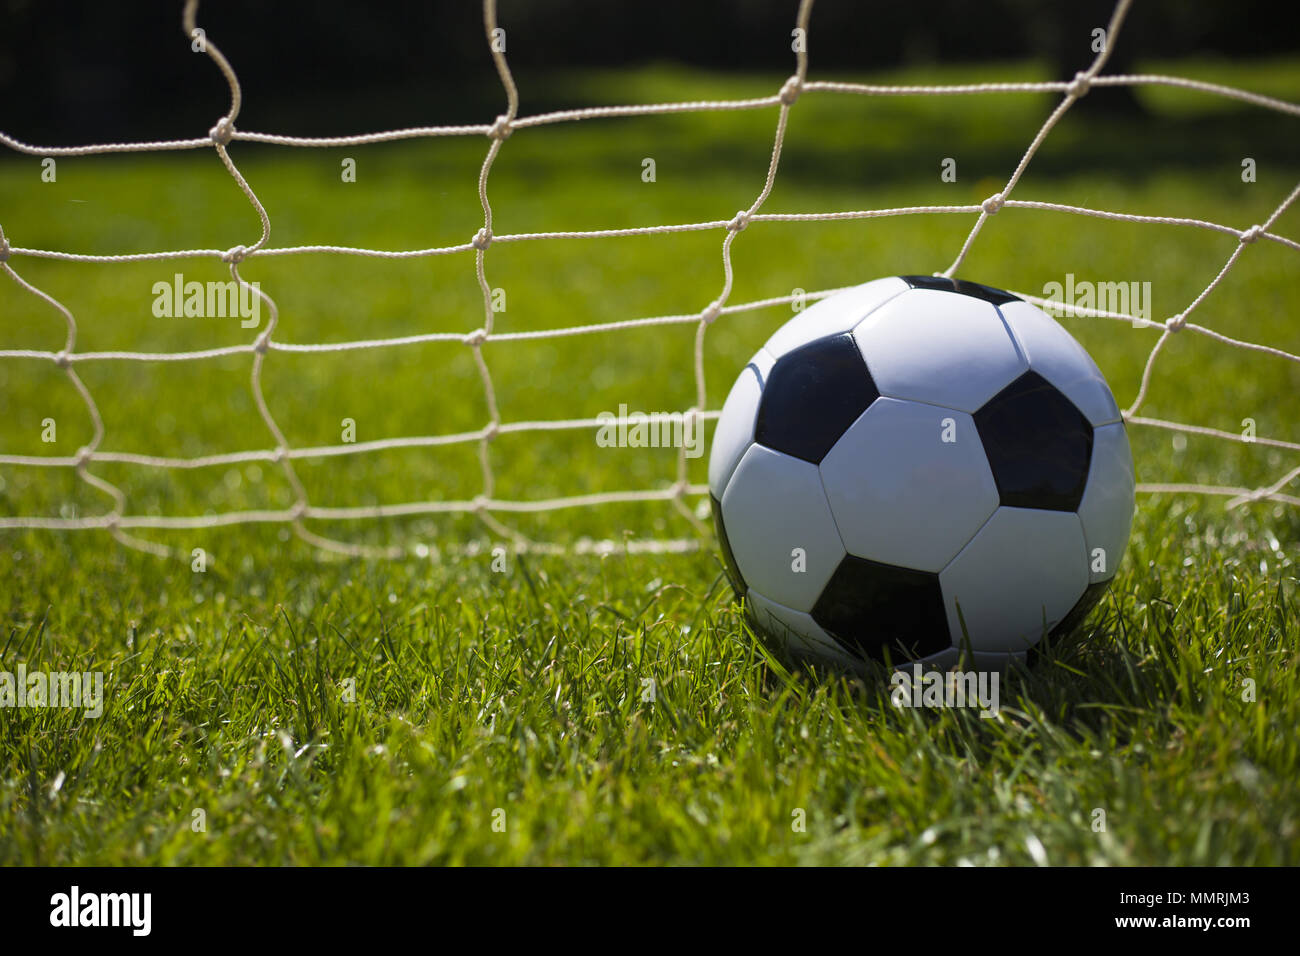 A black and white football in the net Stock Photo